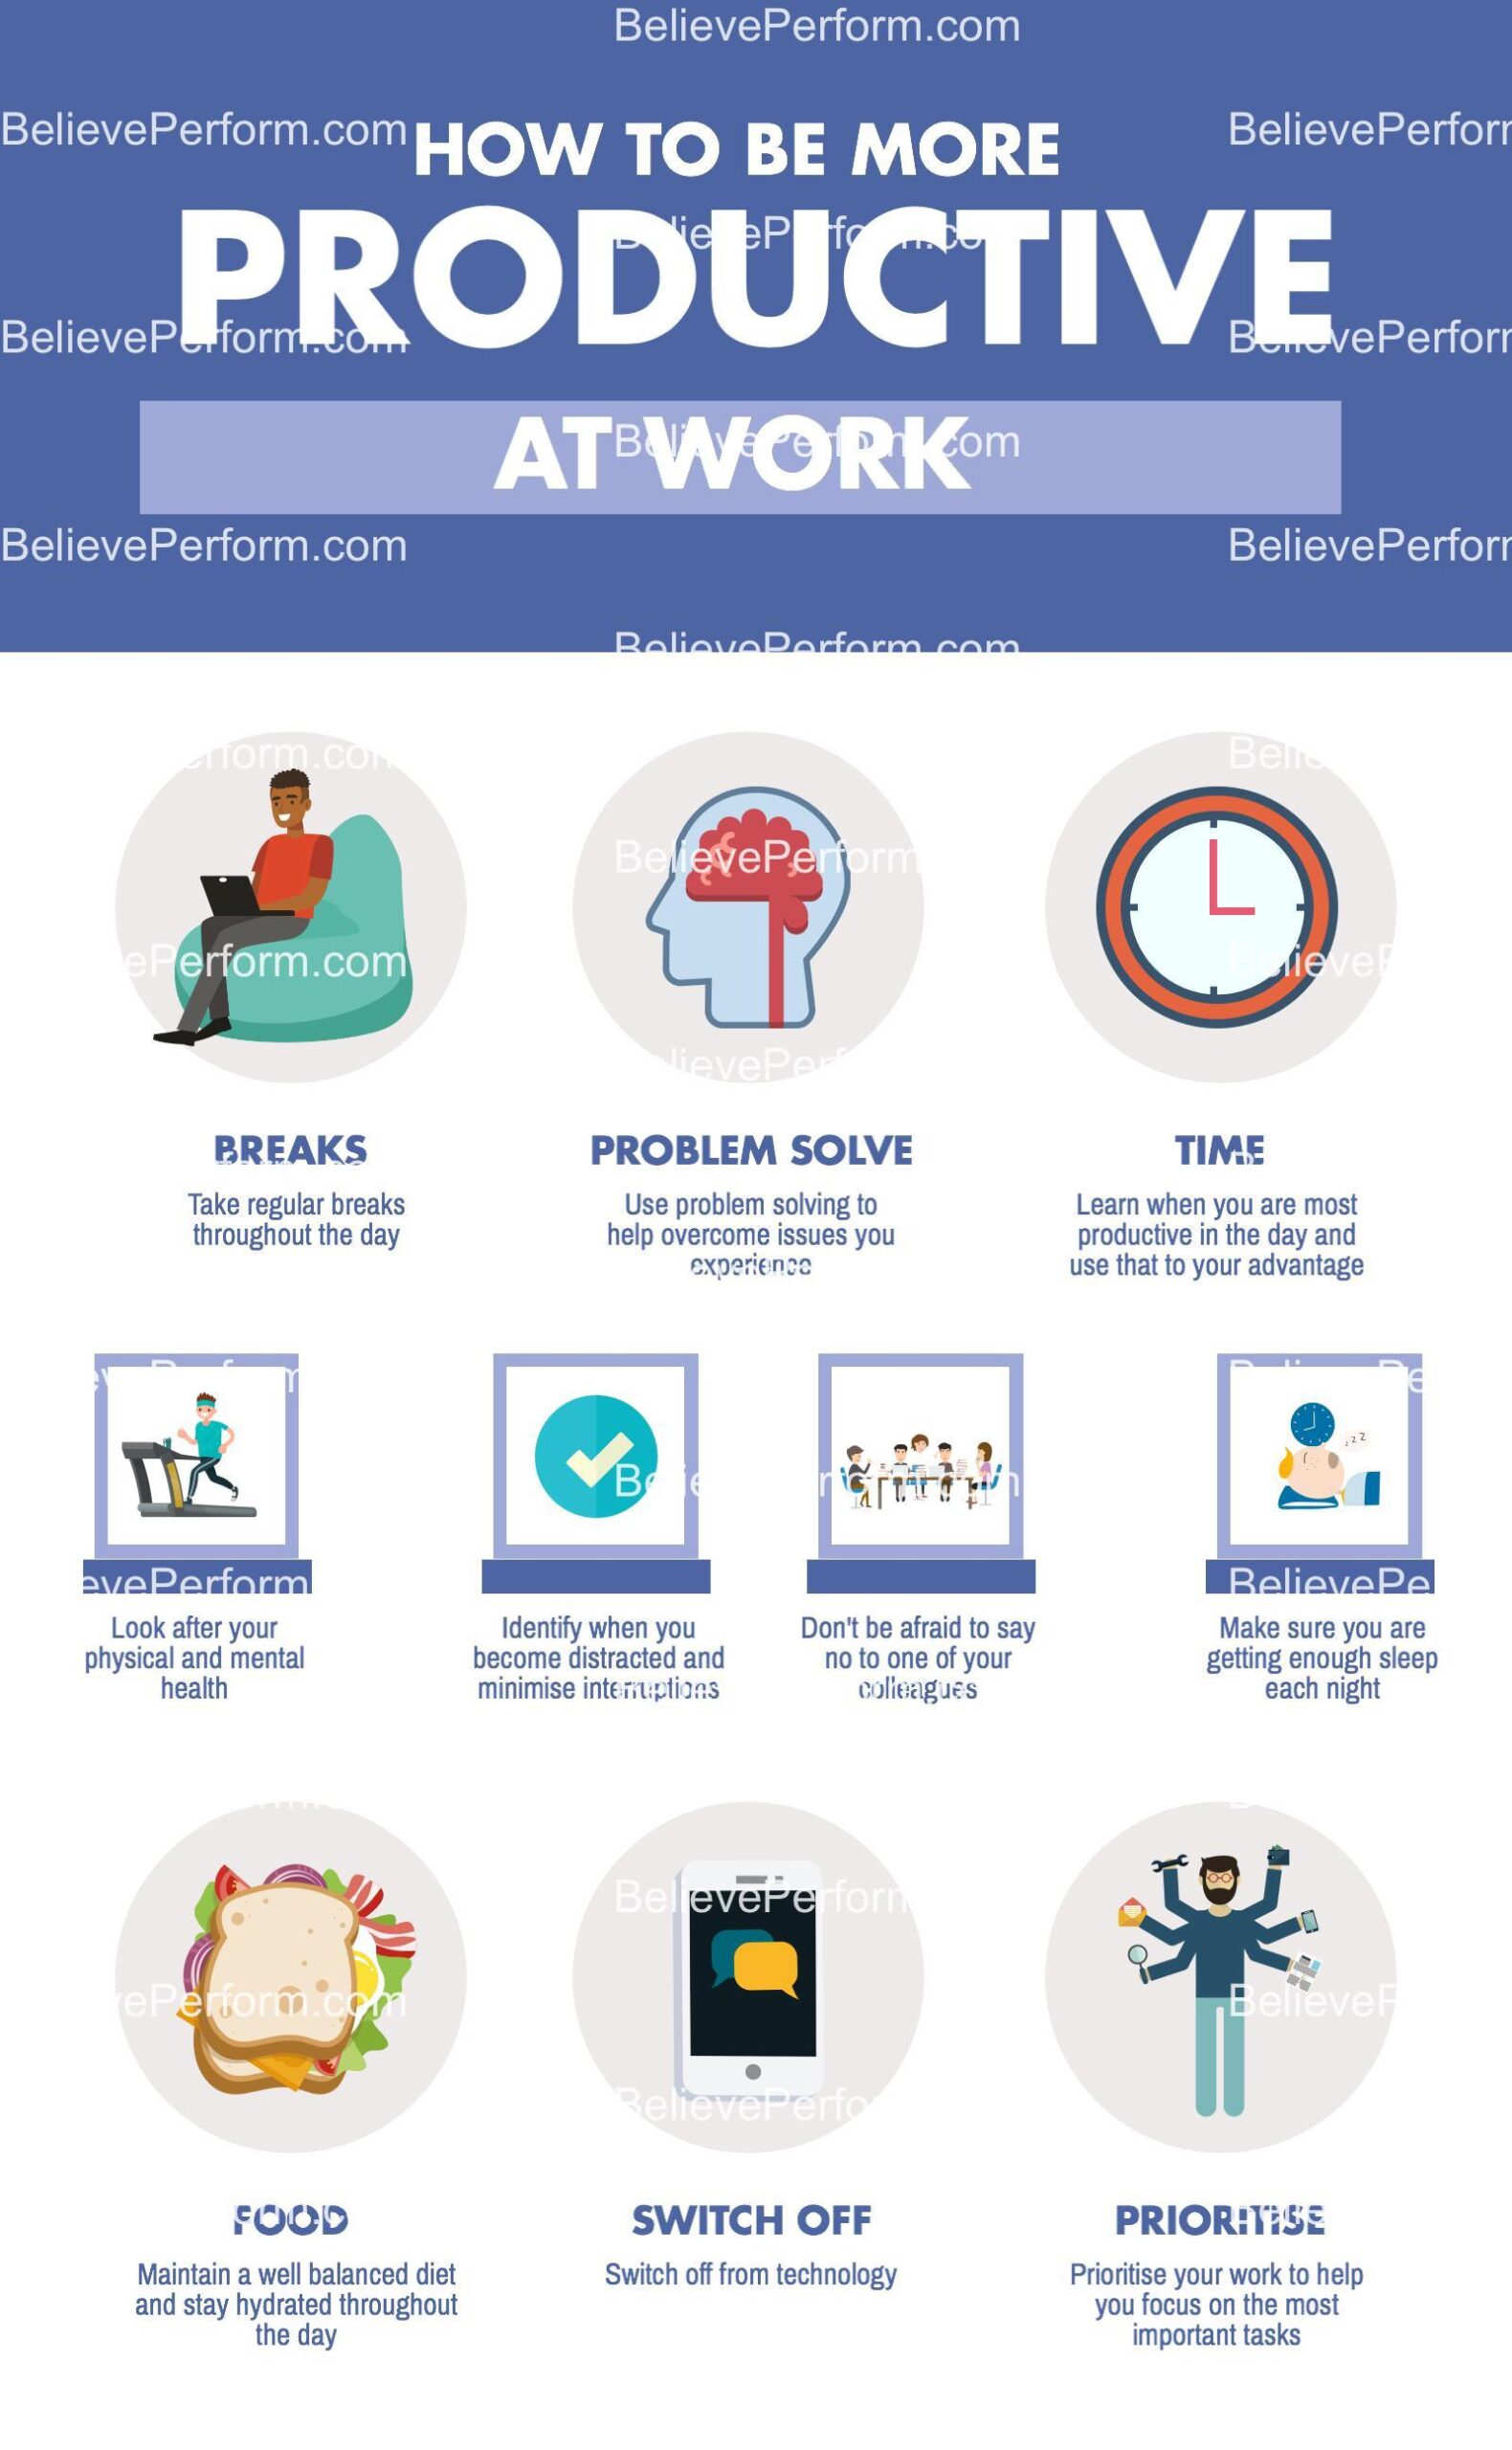 How to be more productive at work BelievePerform The UK's leading